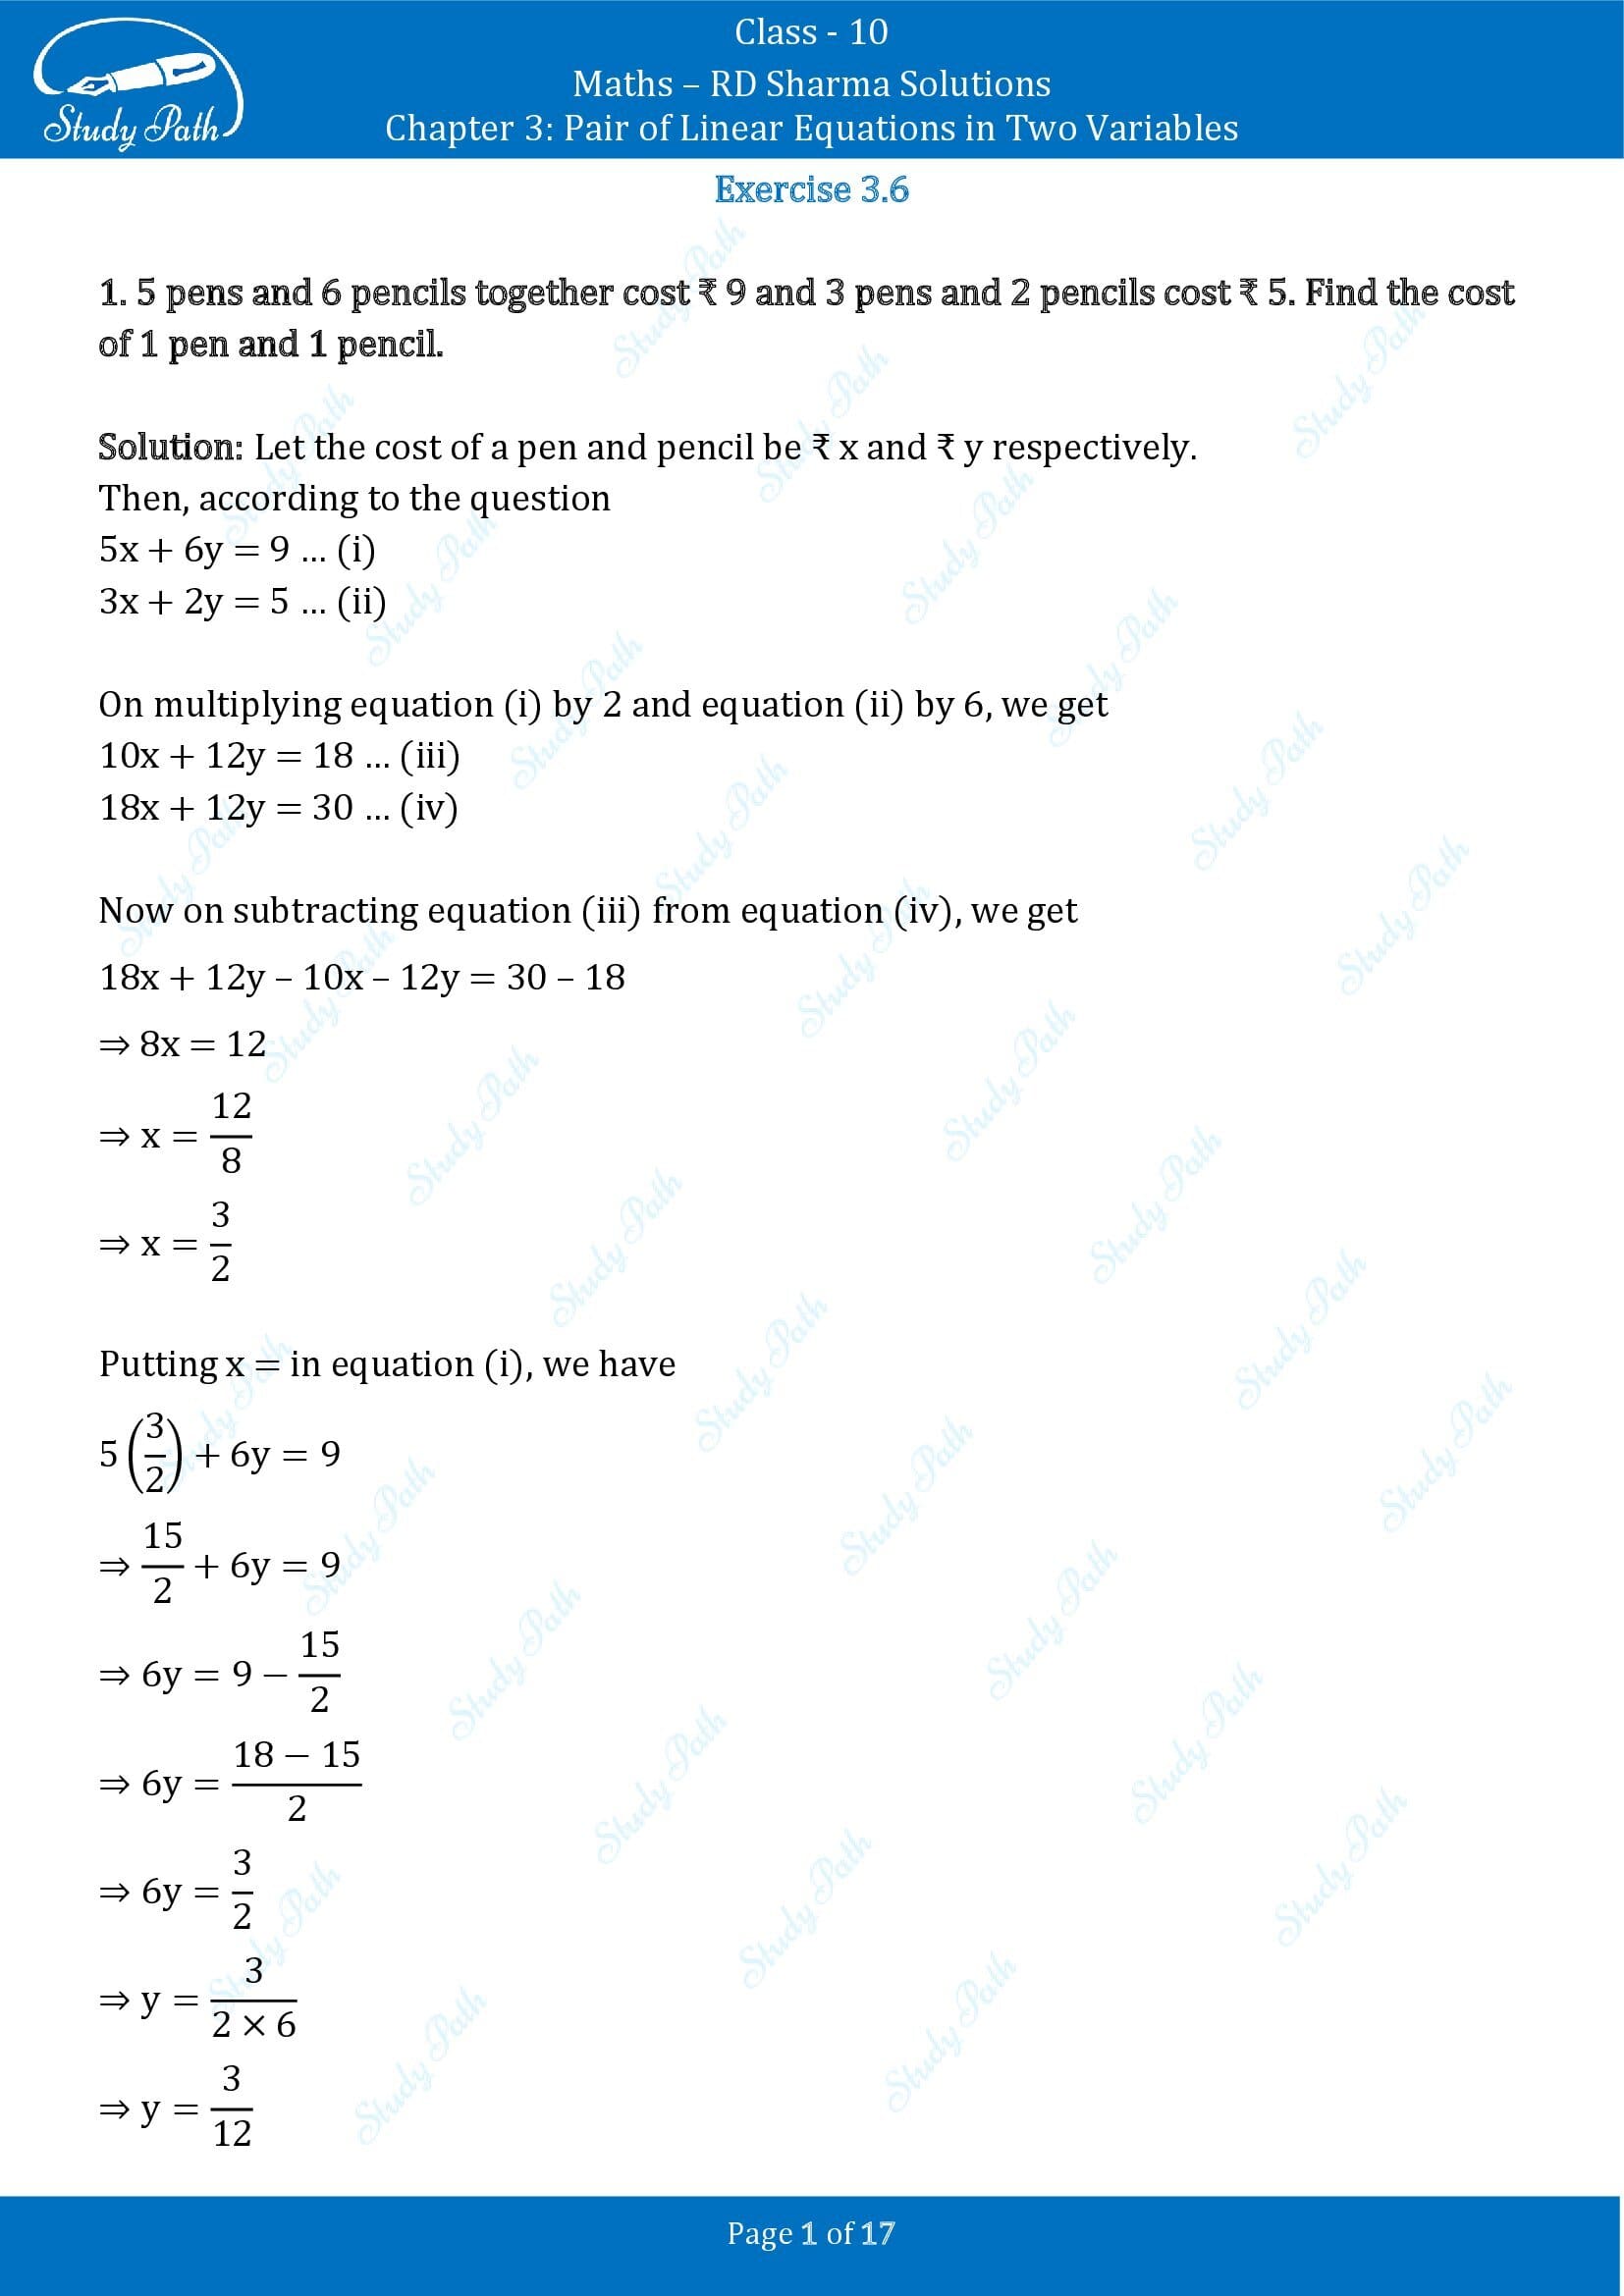 RD Sharma Solutions Class 10 Chapter 3 Pair of Linear Equations in Two Variables Exercise 3.6 00001